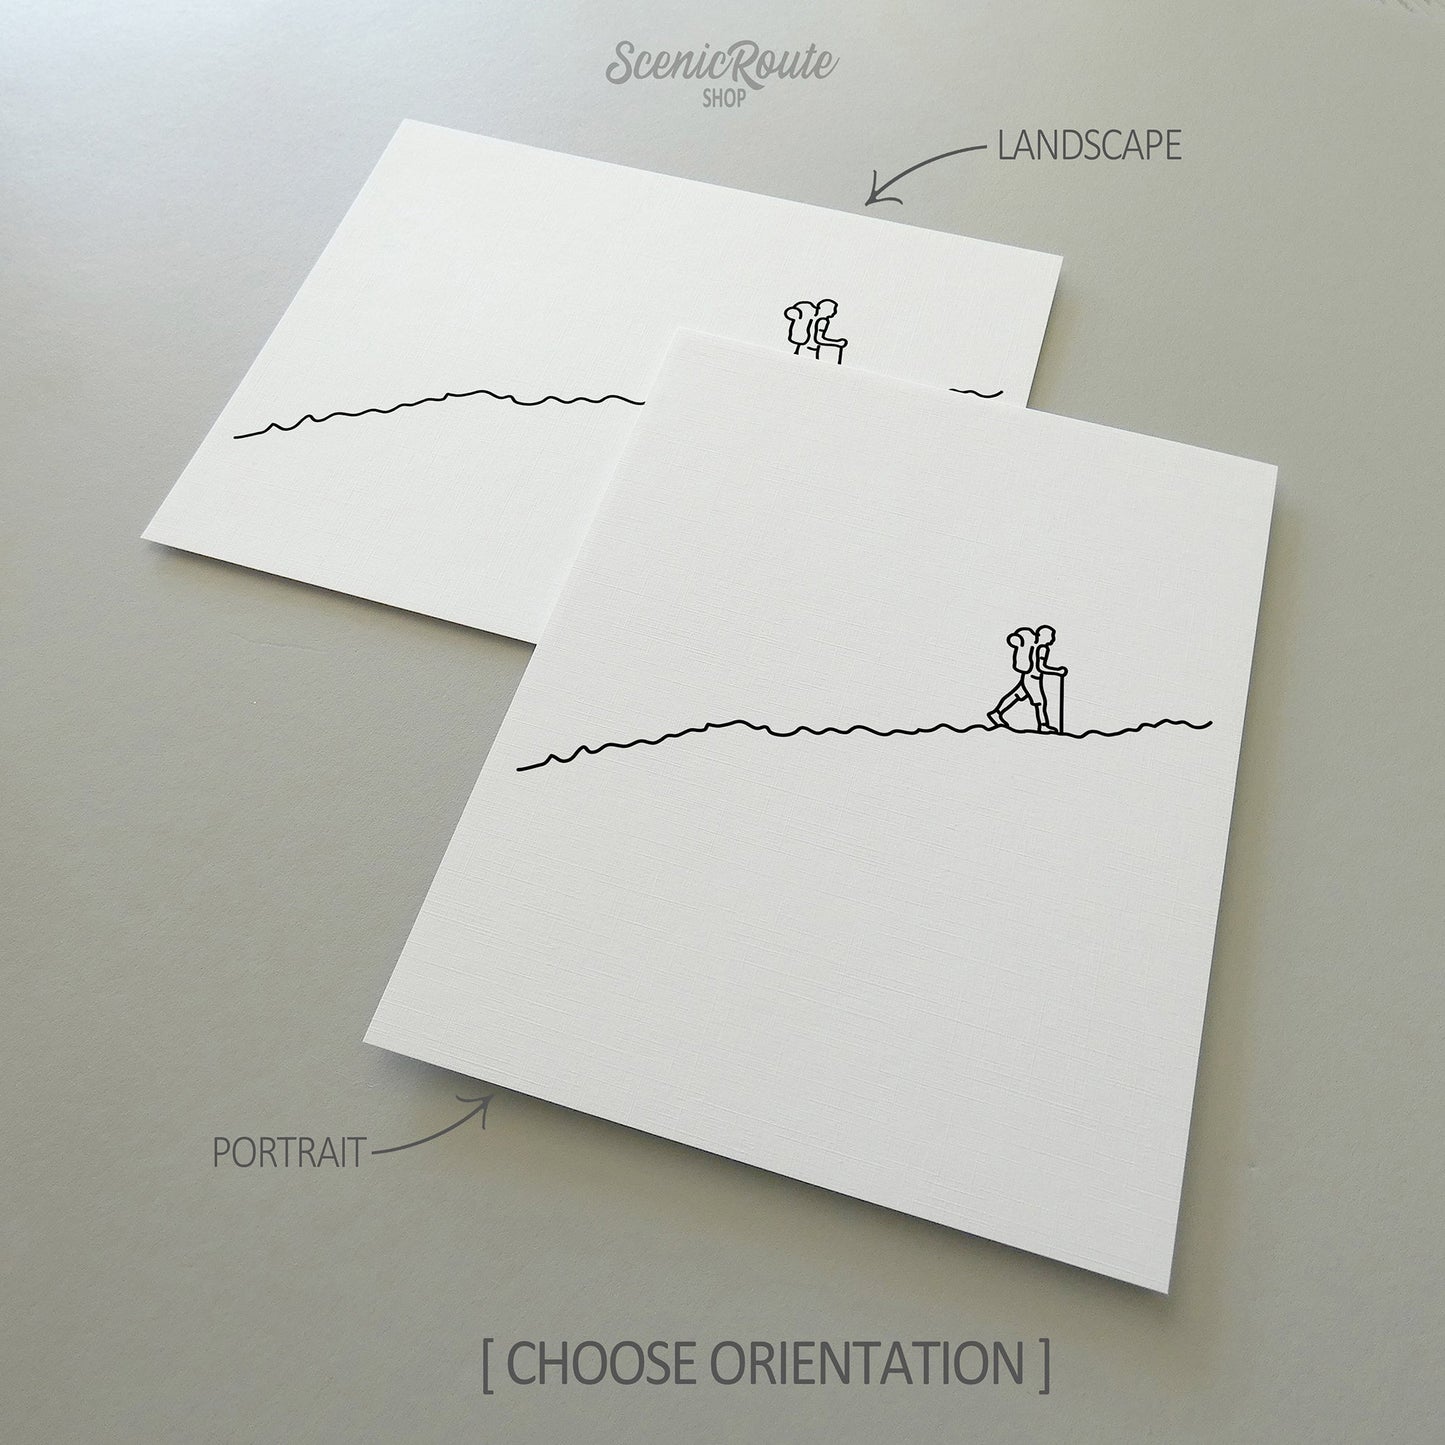 Two line art drawings of Hiking on white linen paper with a gray background.  The pieces are shown in portrait and landscape orientation for the available art print options.